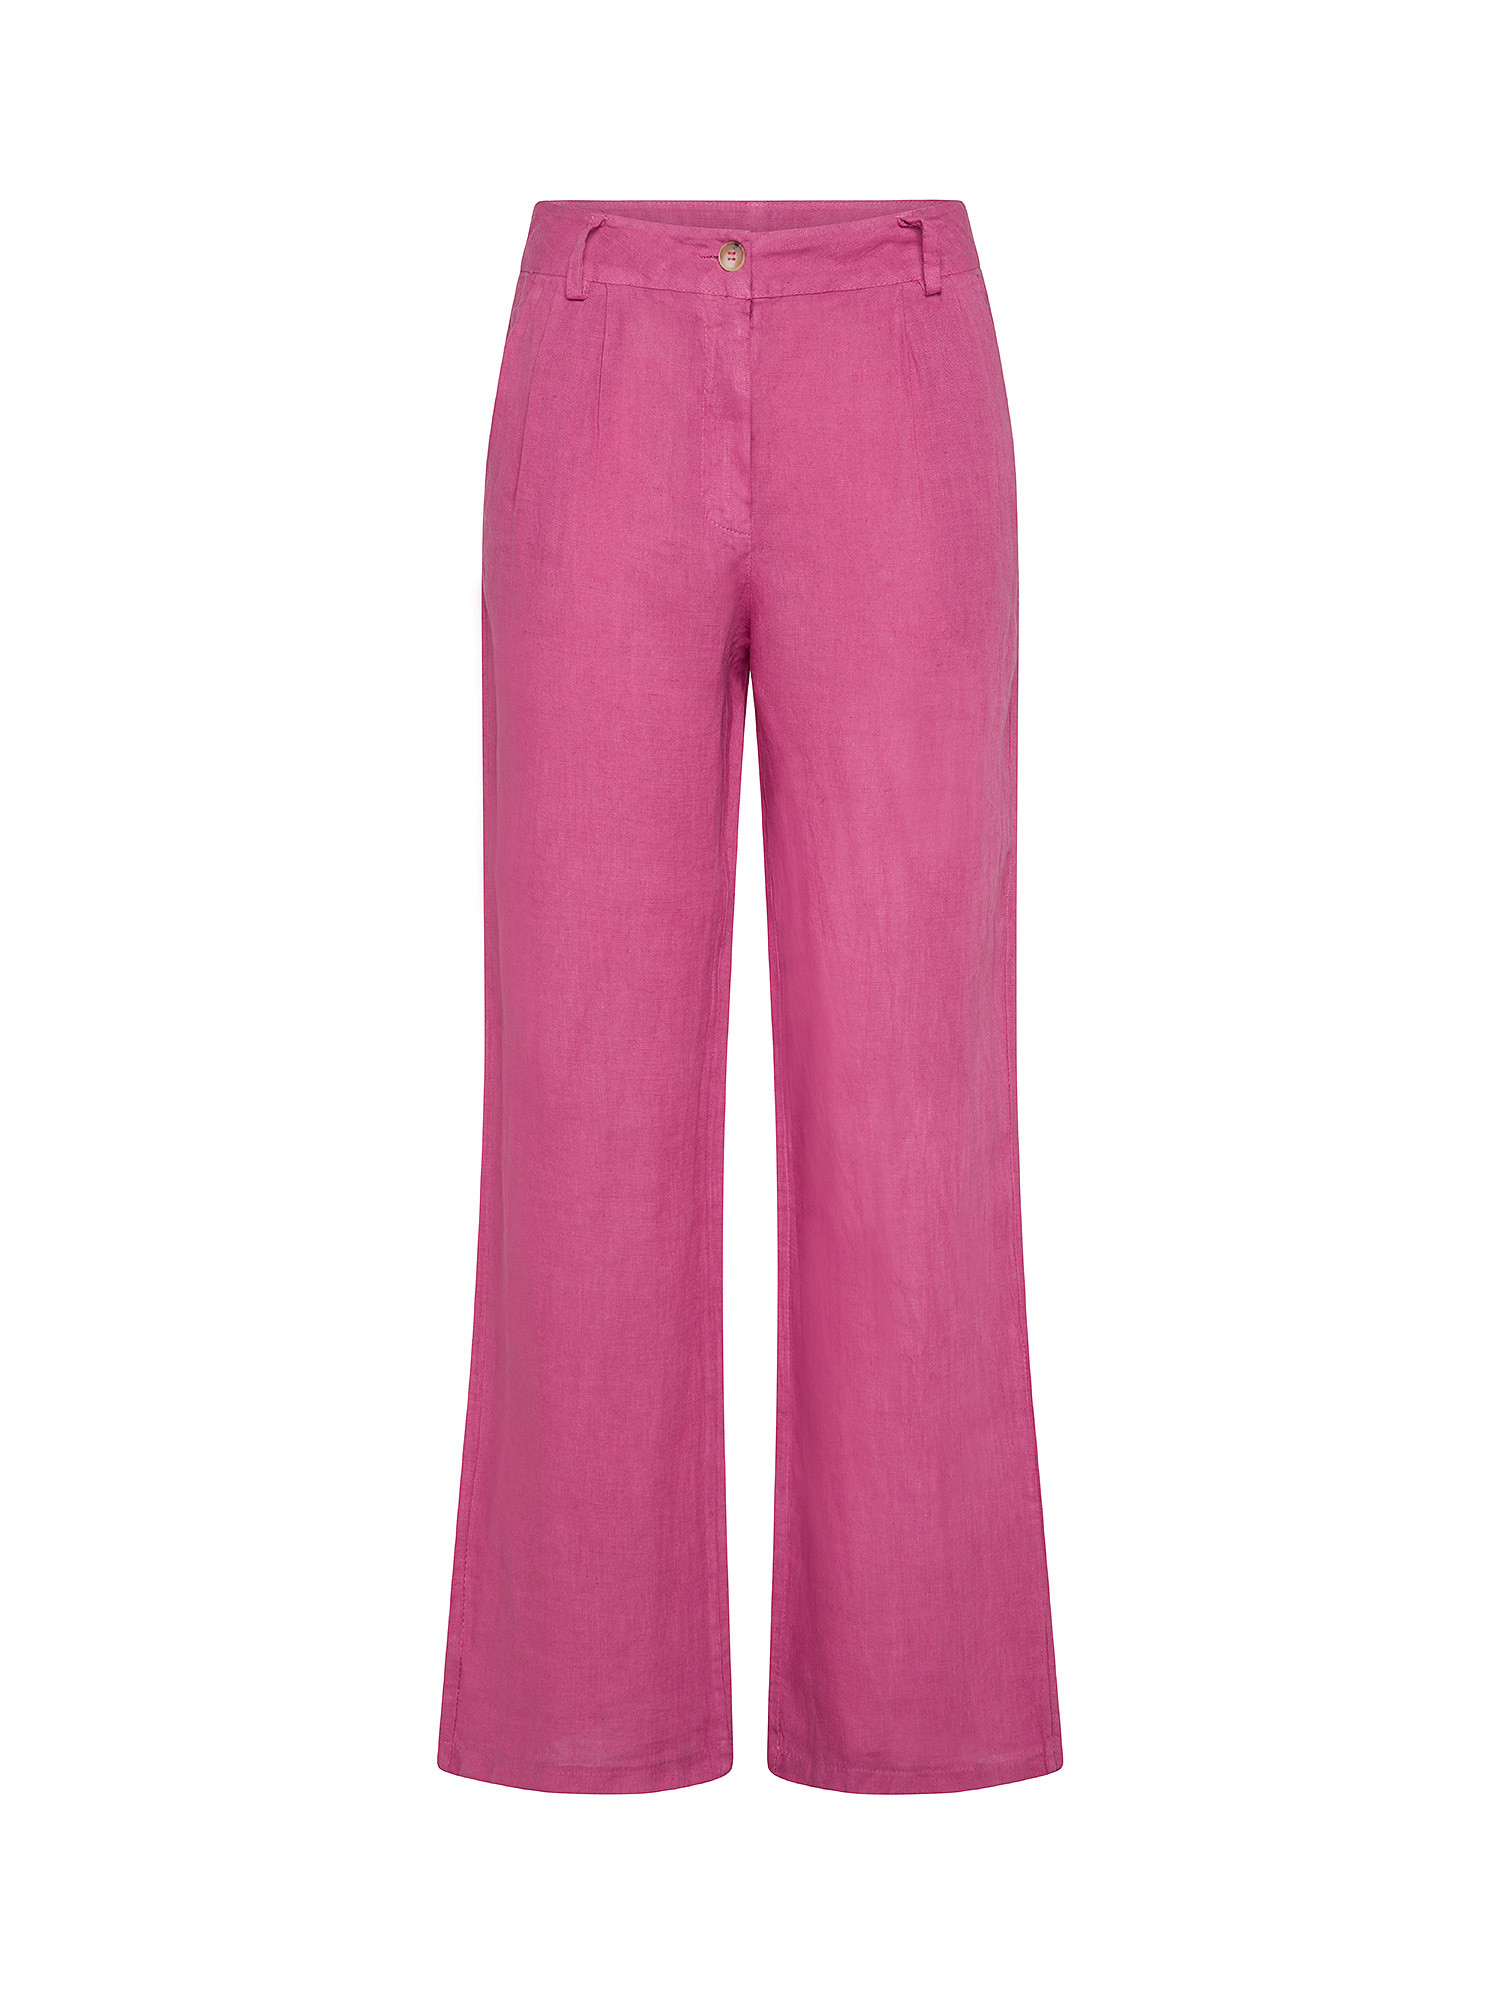 Koan - Linen trousers with pleats, Pink, large image number 0